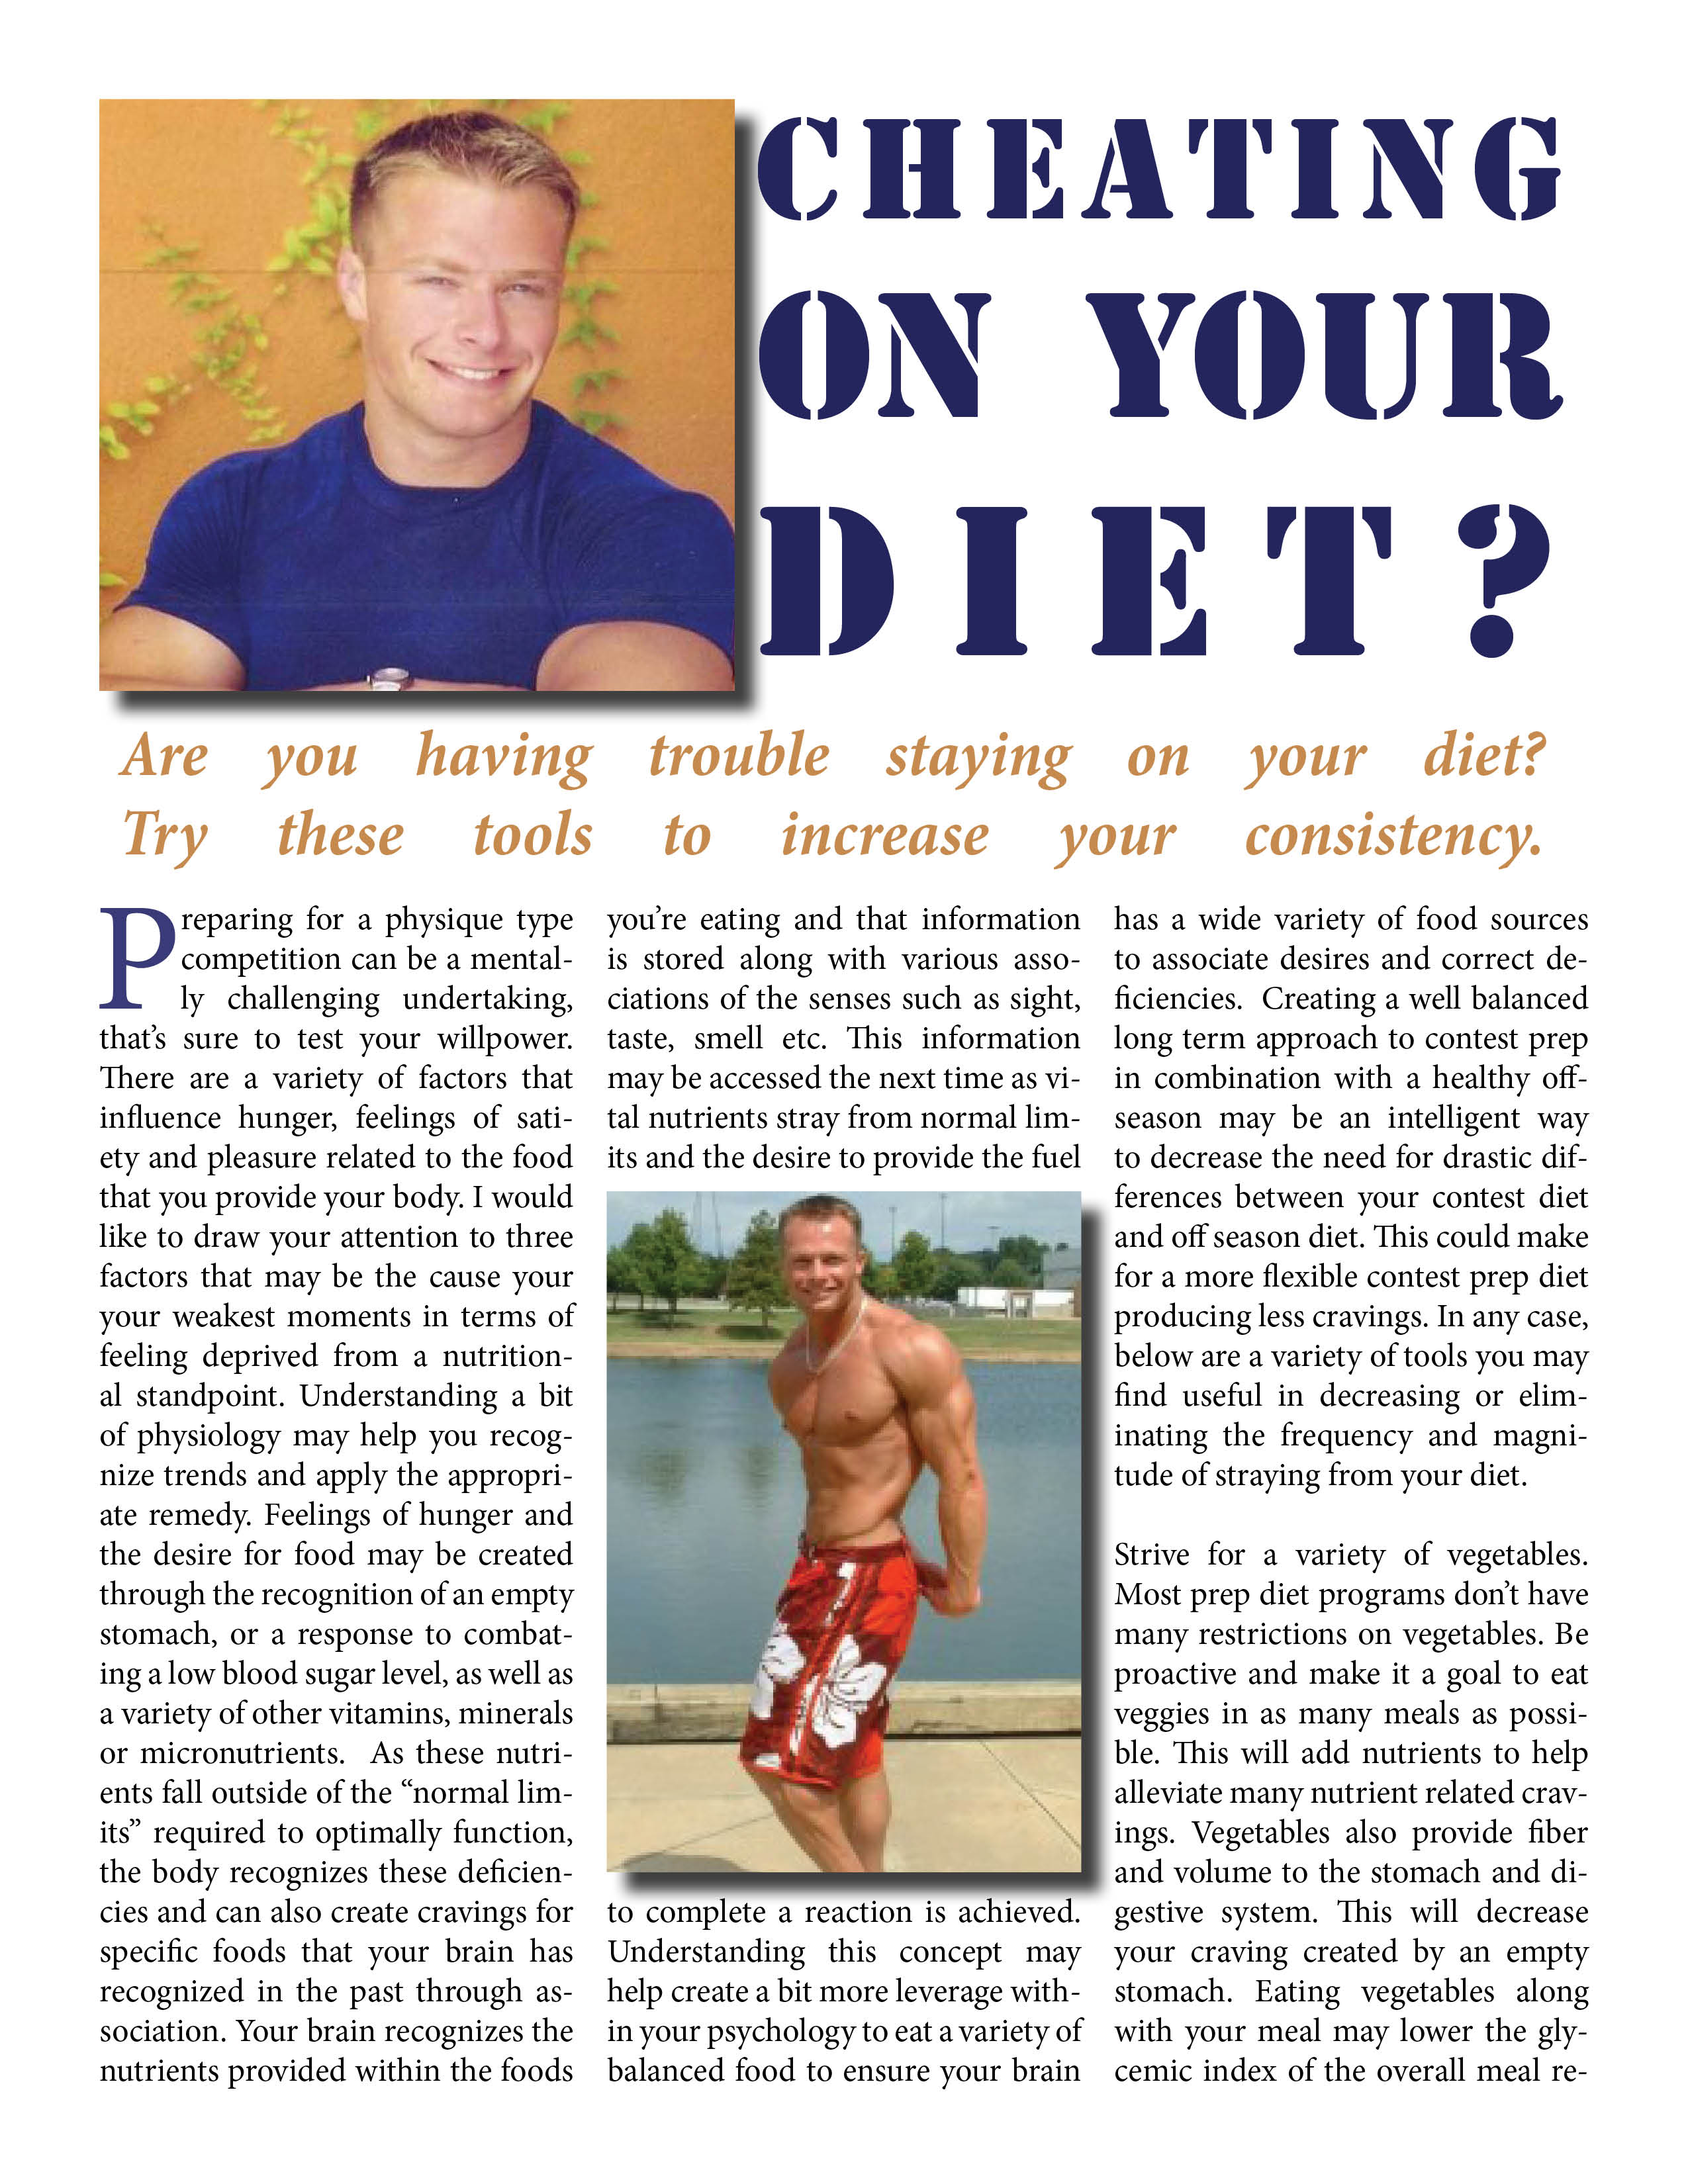 Jeremy Williams - Williams Productions - NW Fitness Magazine